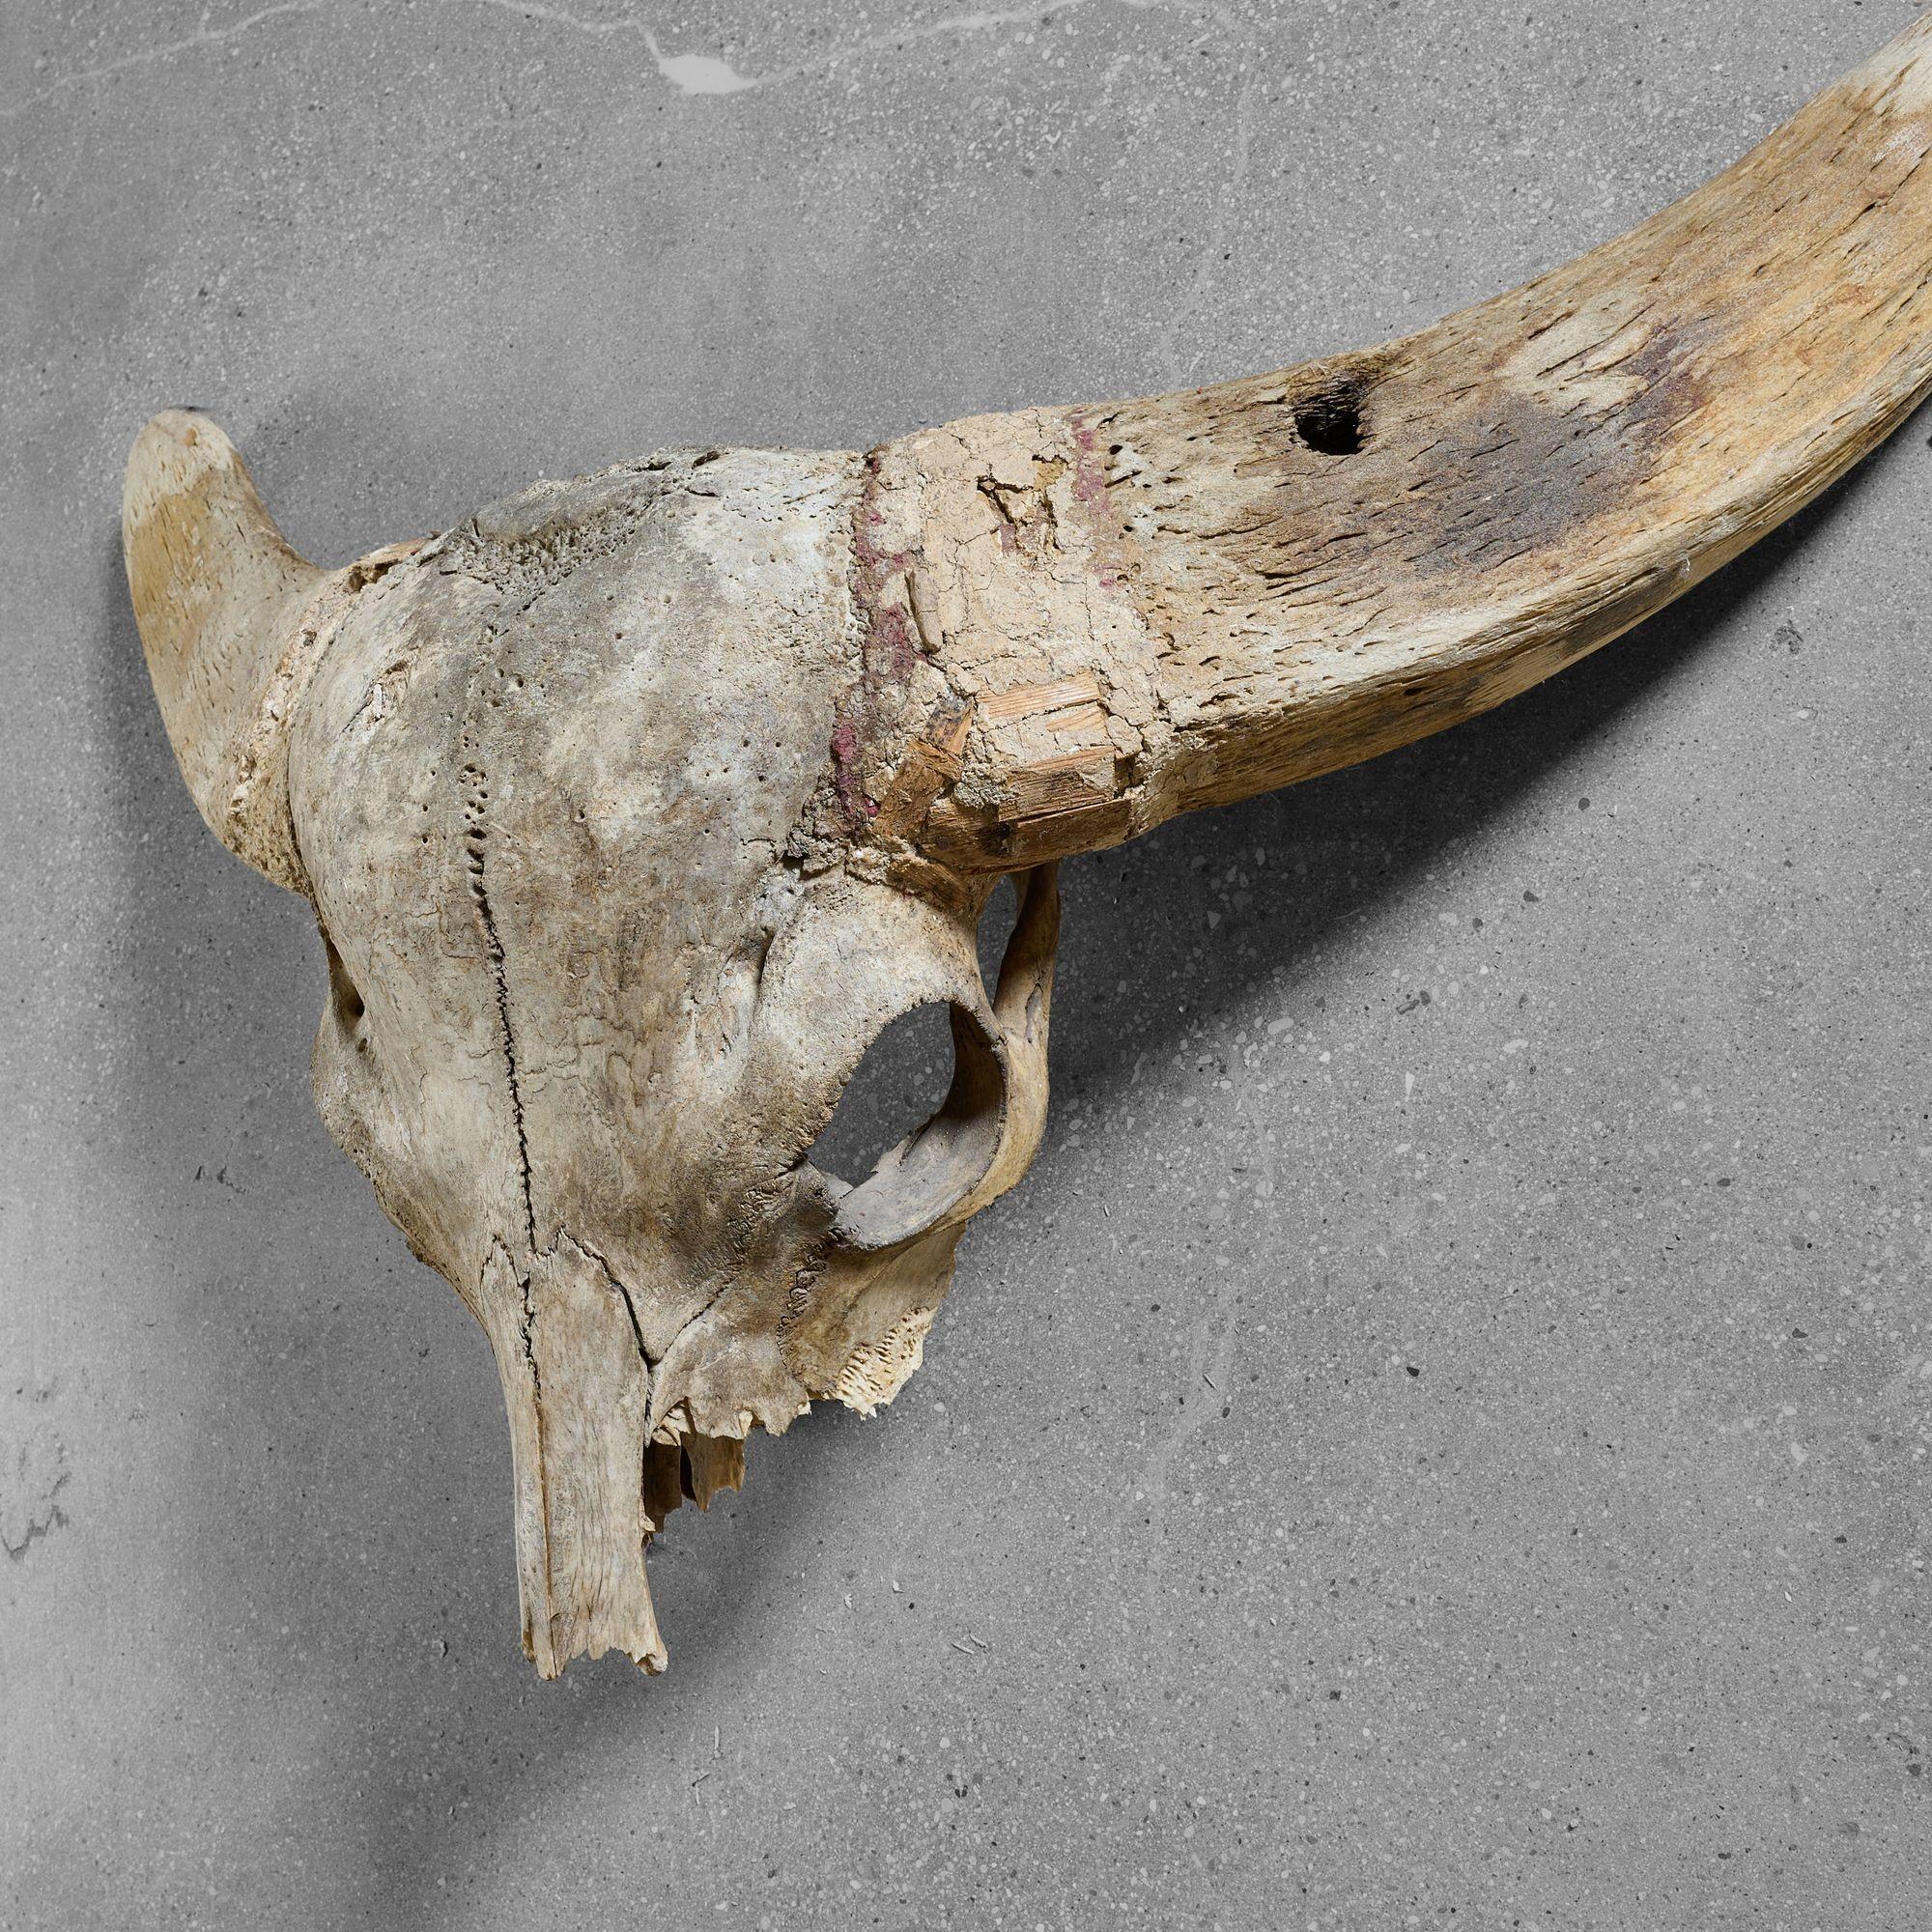 Very old water buffalo skull with cool wood repairs.